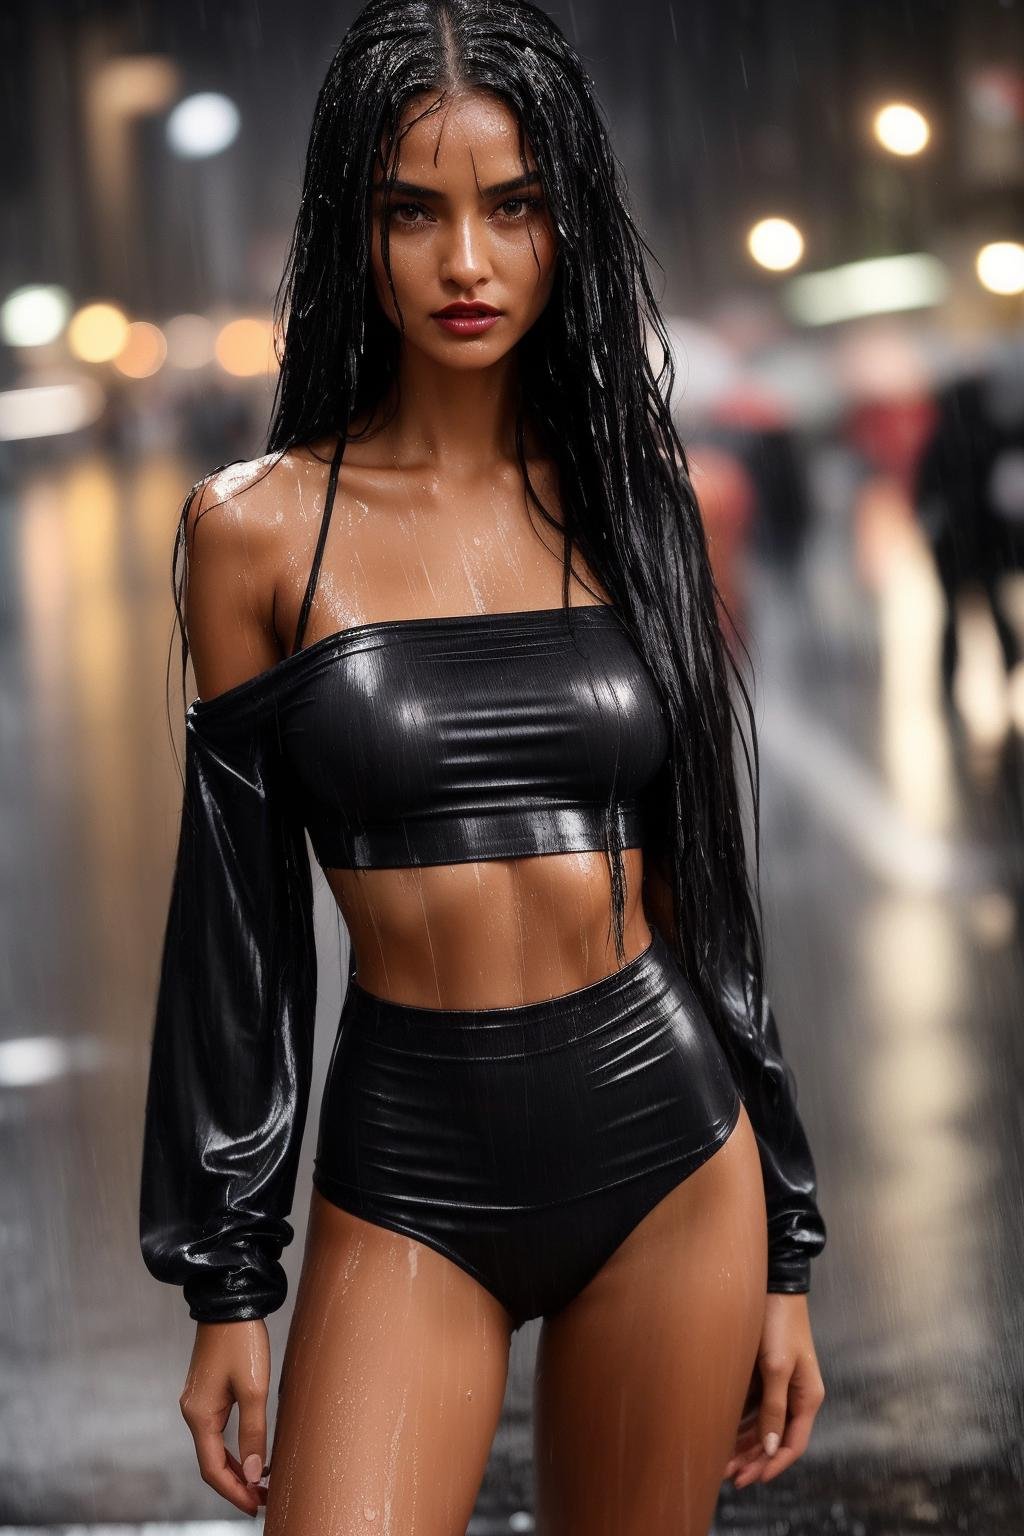 “A close-up shot of a  tanned girl with very long legs, long black hair, skinny body, narrow waist, (abs:0.7), in public at a German City ((at night in the pouring rain)) with spandex leggings and crop top (smokey dark eyes and lipstick ) with a pensive expression, wearing a dark, off-the-shoulder dress and a single, statement piece of jewelry, The background should be out of focus and feature soft, warm tones” (soaking wet) (wet hair, wet body, wet clothes)